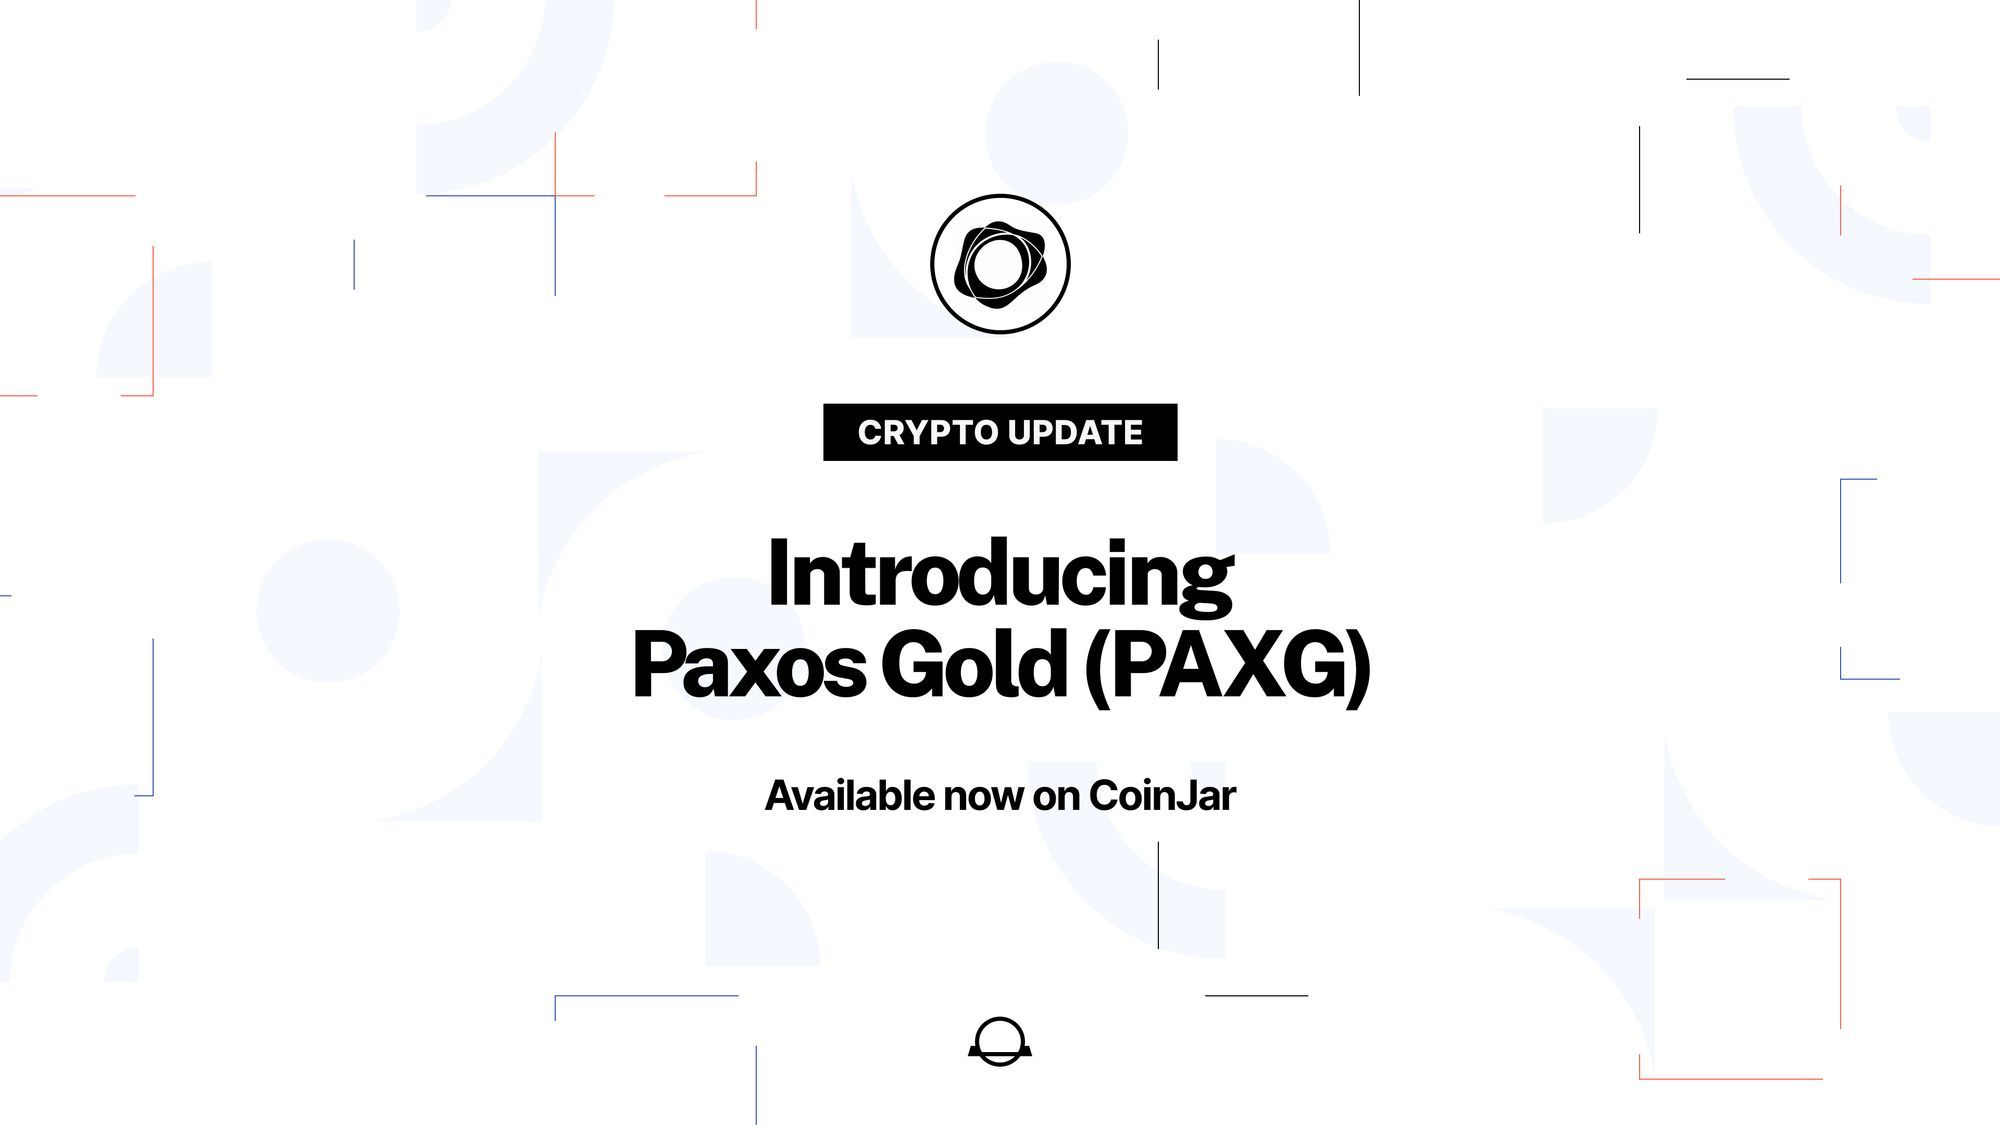 PAXG now available on CoinJar